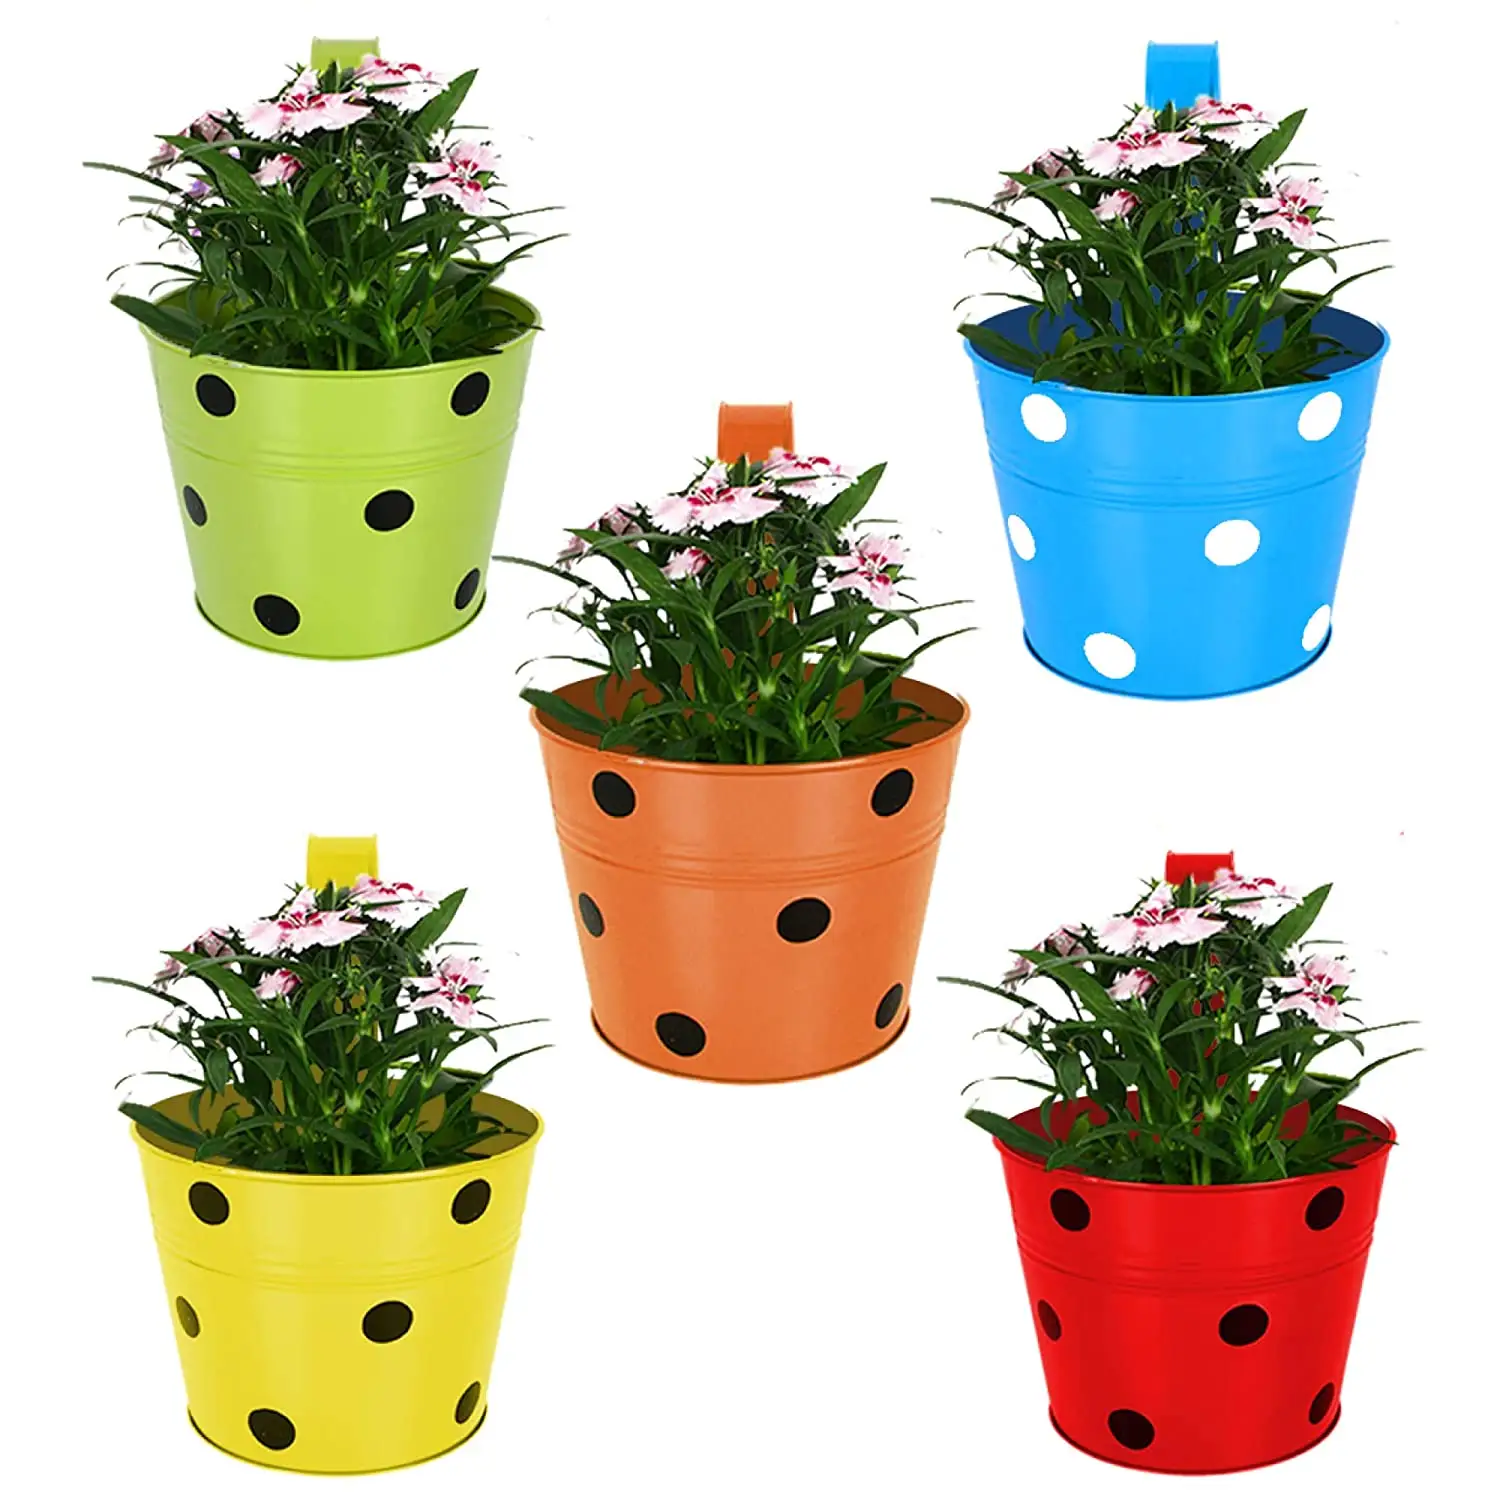 High Quality Mini Metal Planter Customizable Flower Pots for Balcony Garden Home Garden Planters At wholesale Price From India